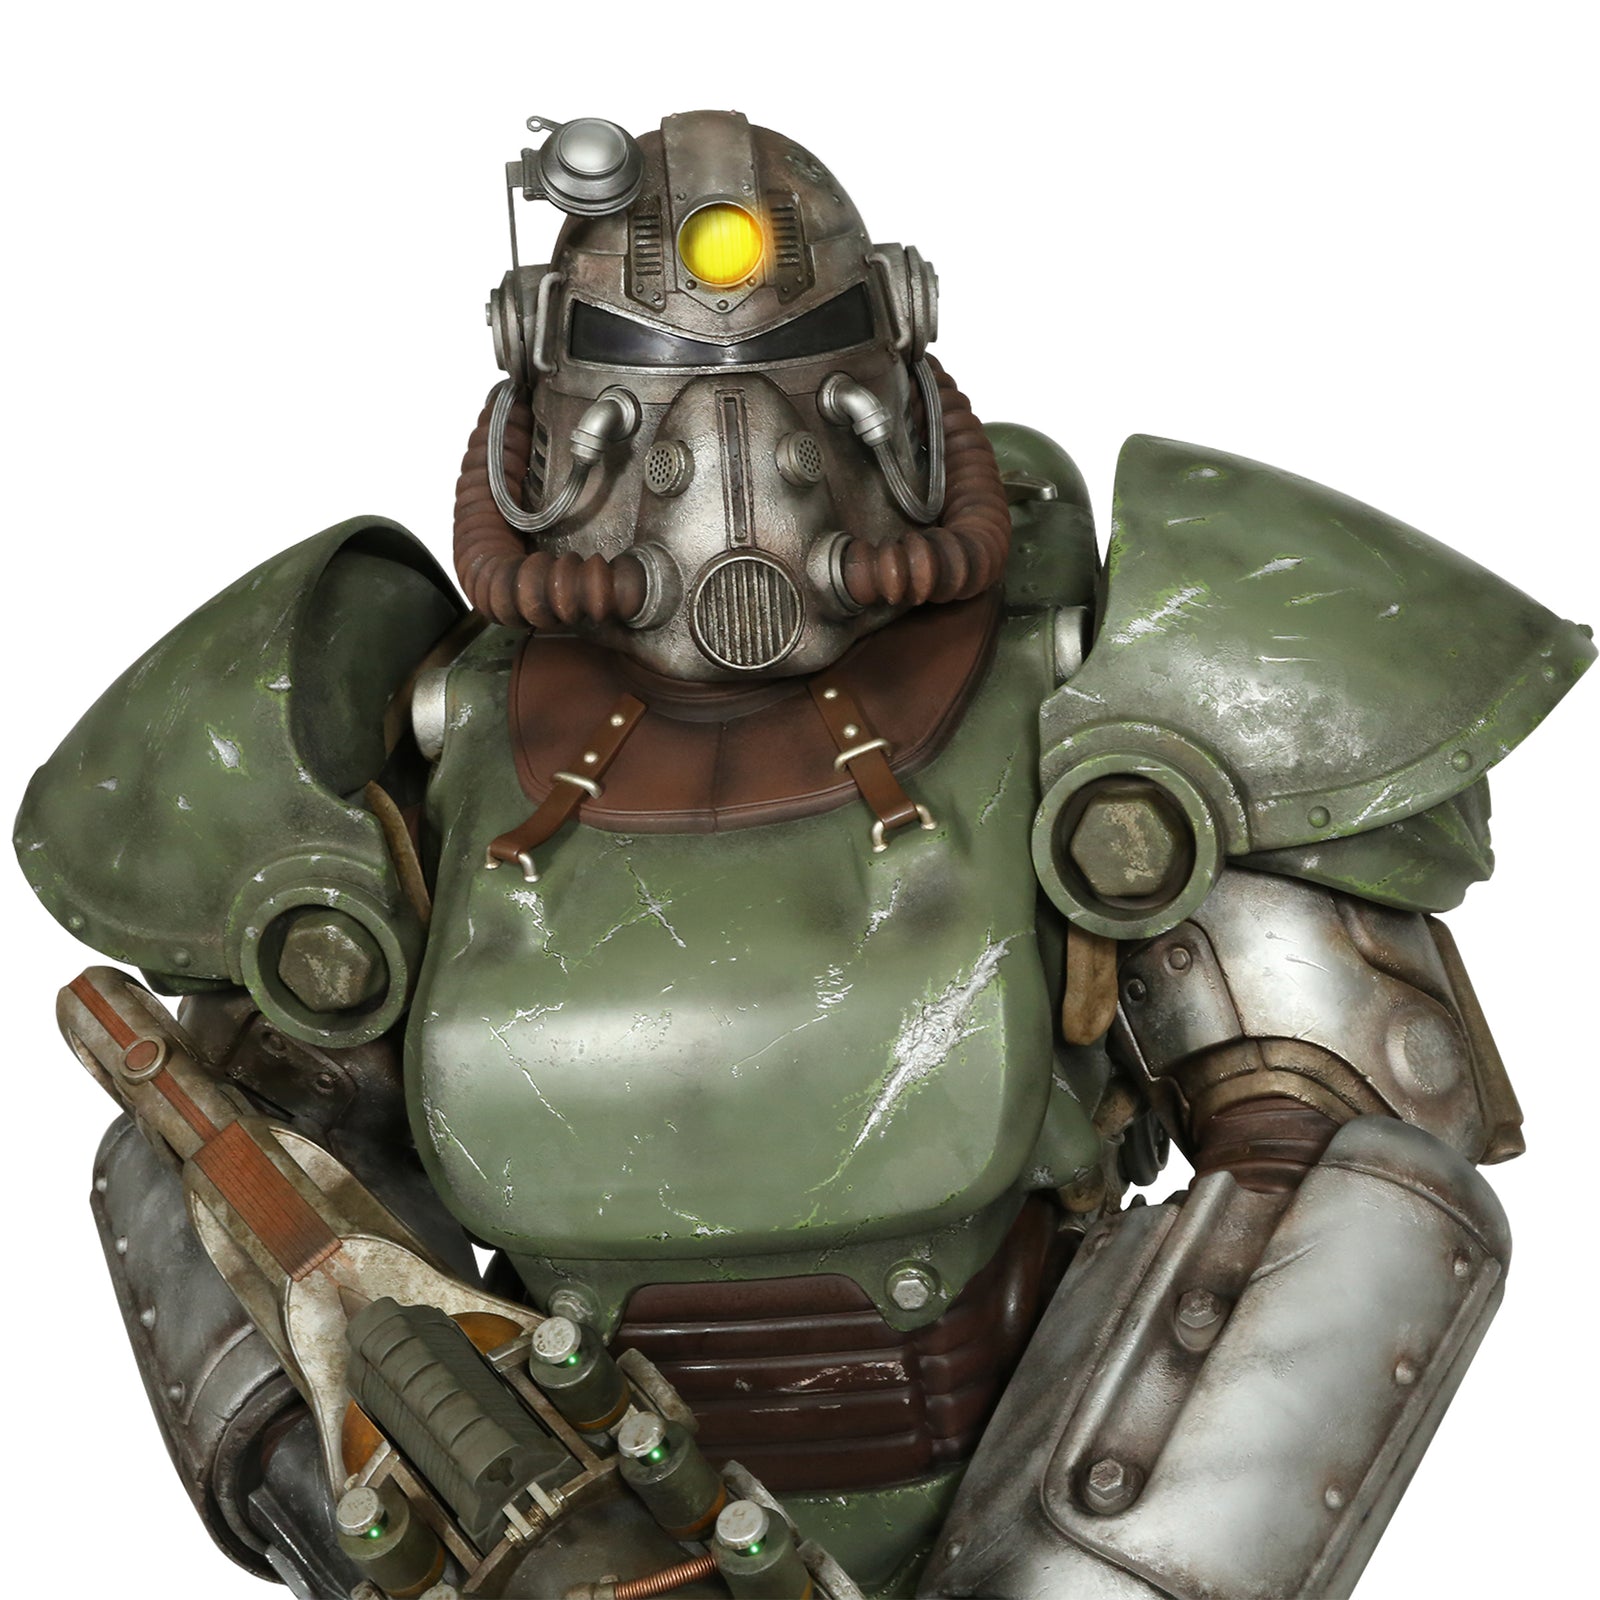 T 51b Power Armor Chronicle Collectibles